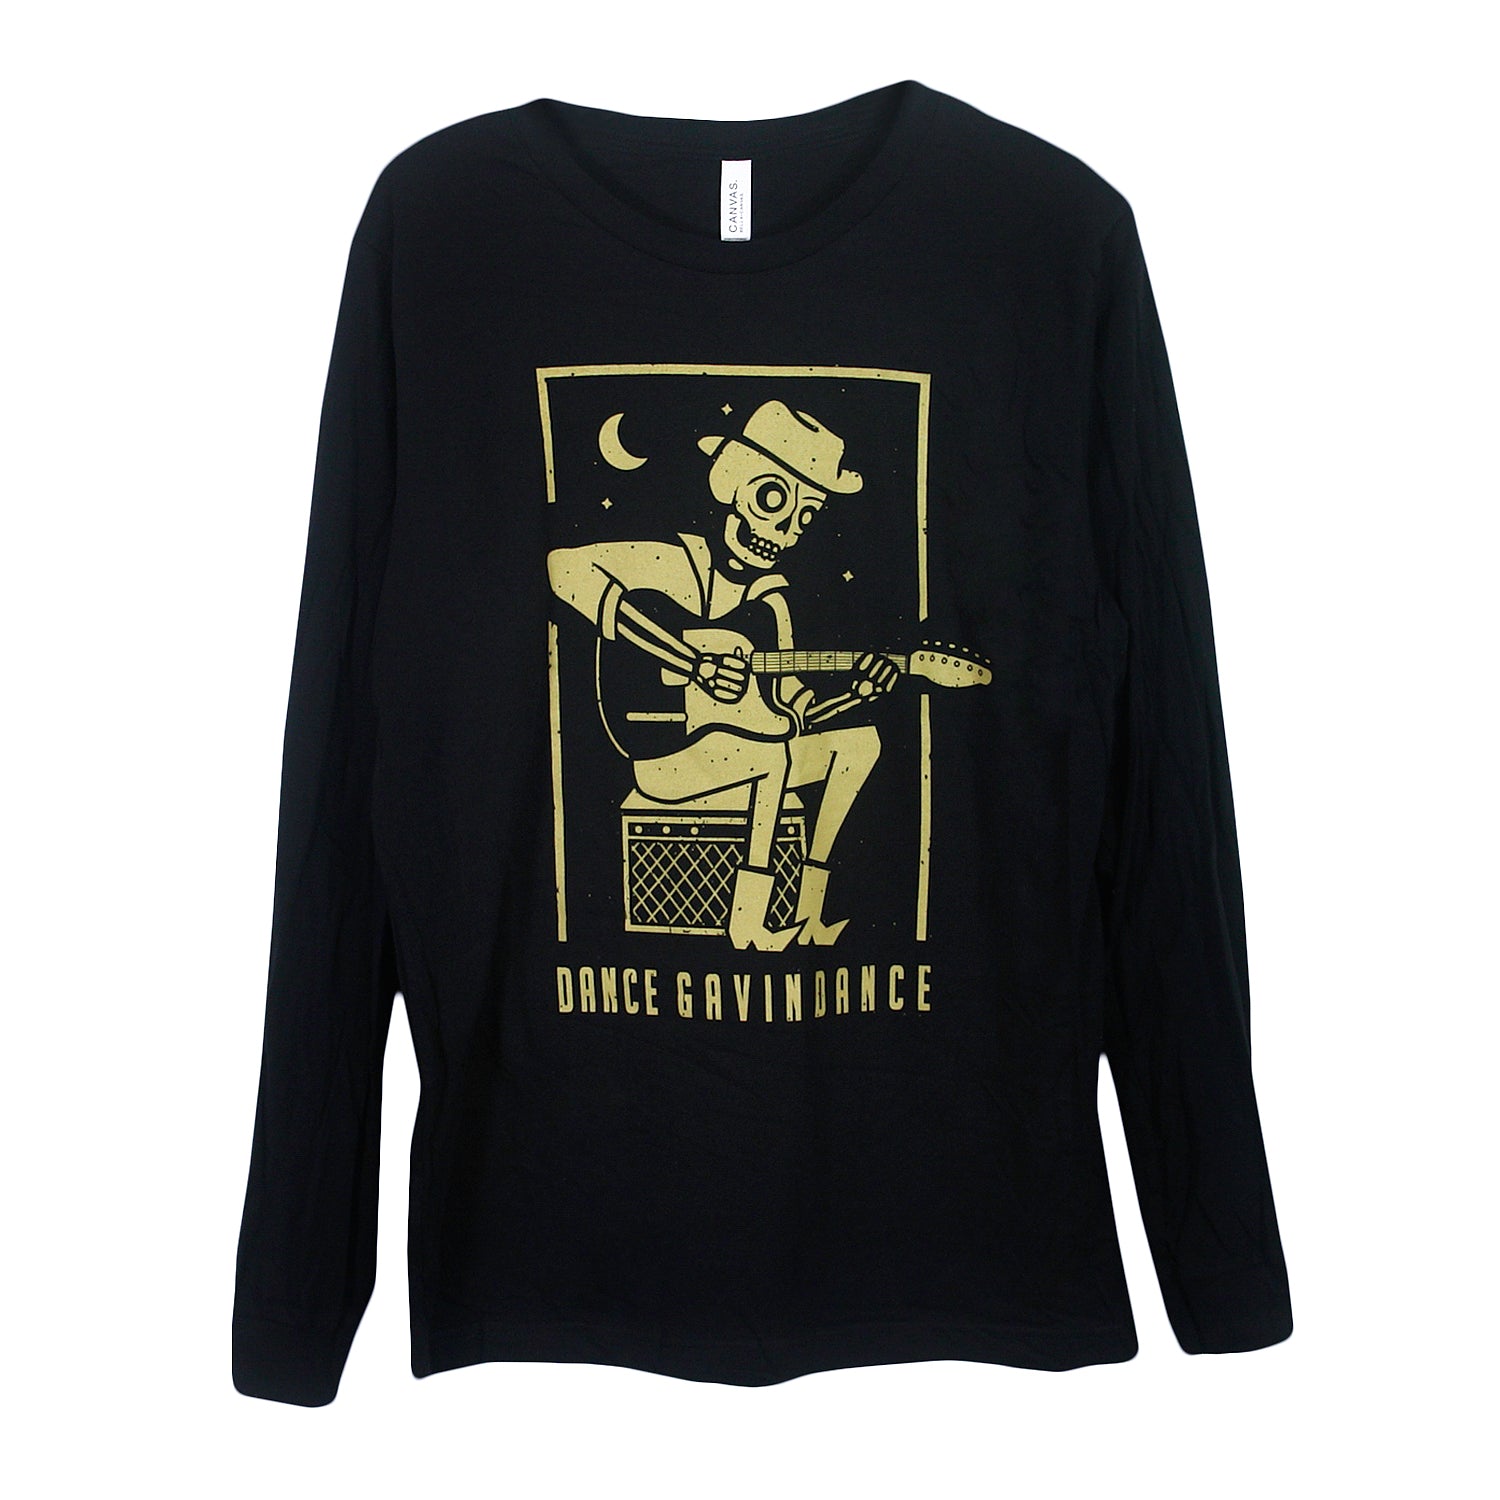 image of a black long sleeve tee shirt on a white background. tee has full body print in gold of a skeleton sitting playing a guitar. across the bottom says dance gavin dance